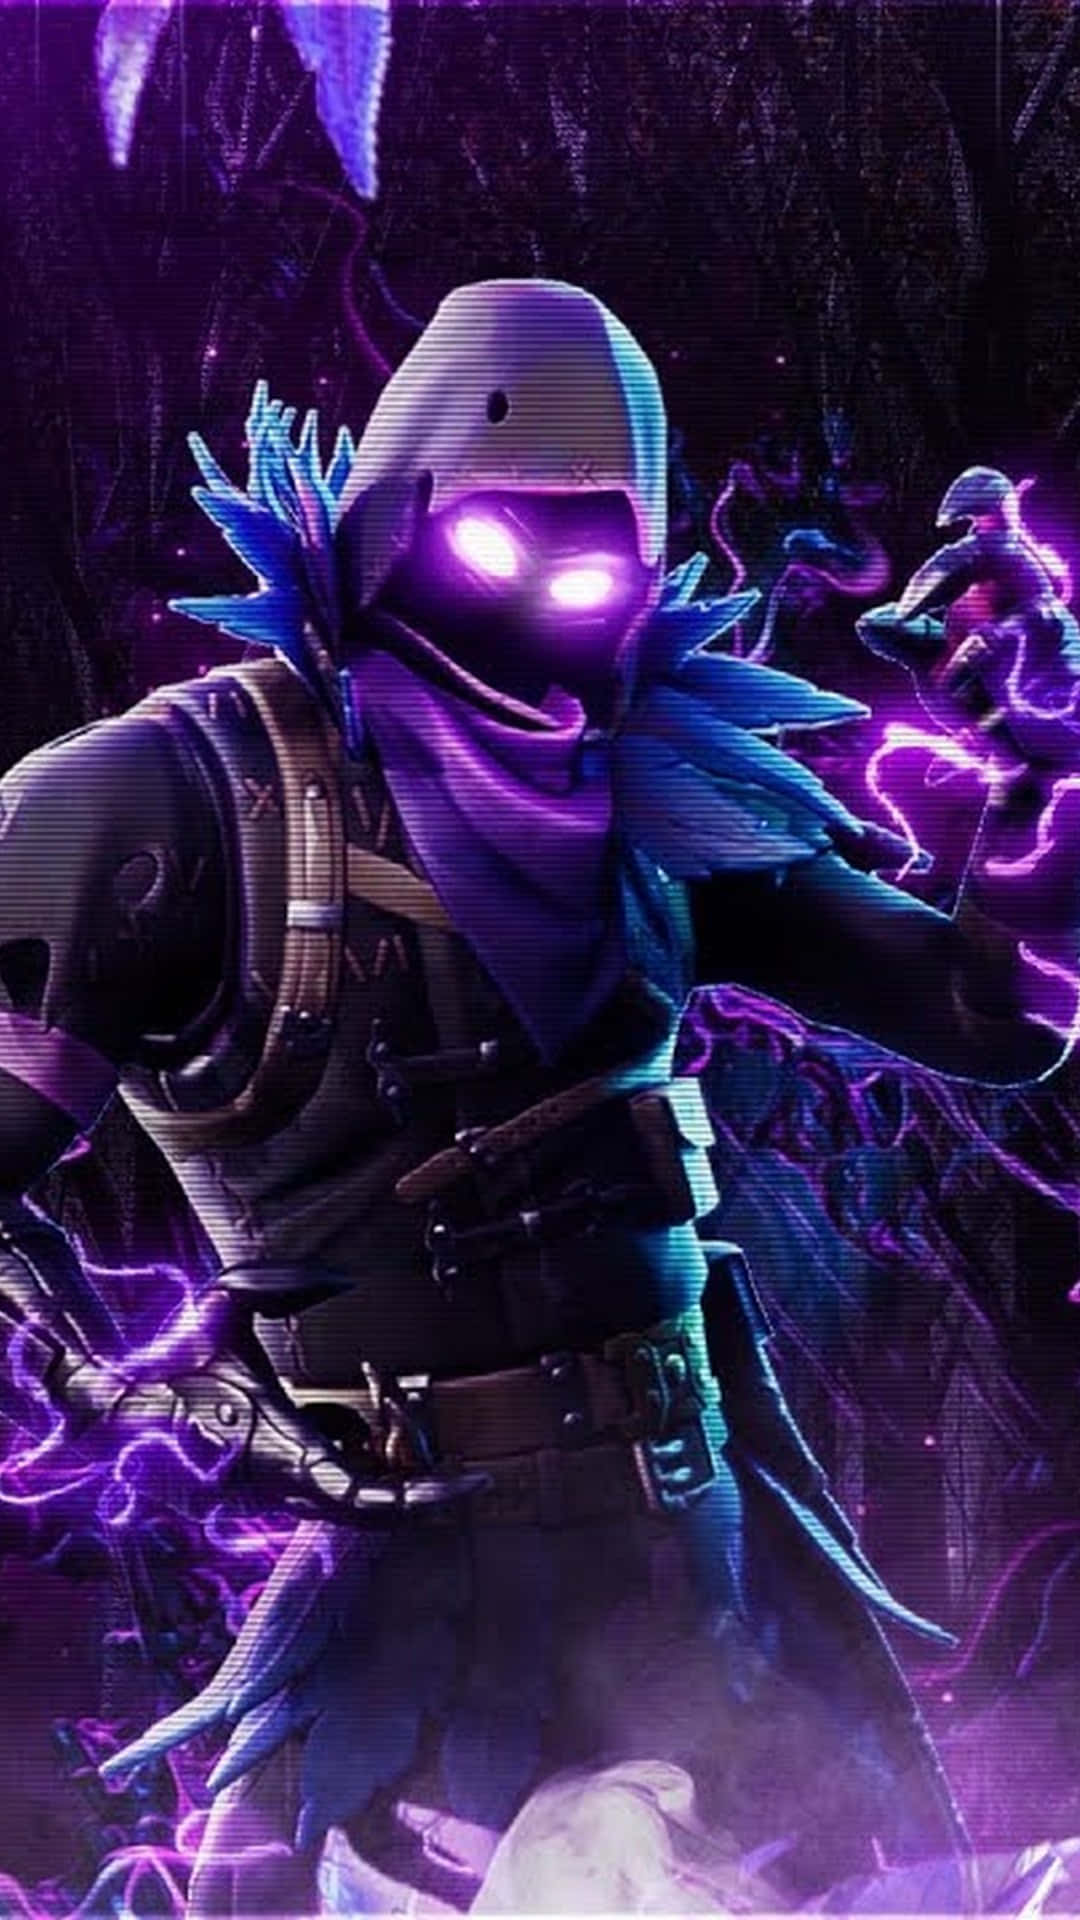 Download The Best Fortnite Iphone Wallpaper Now!